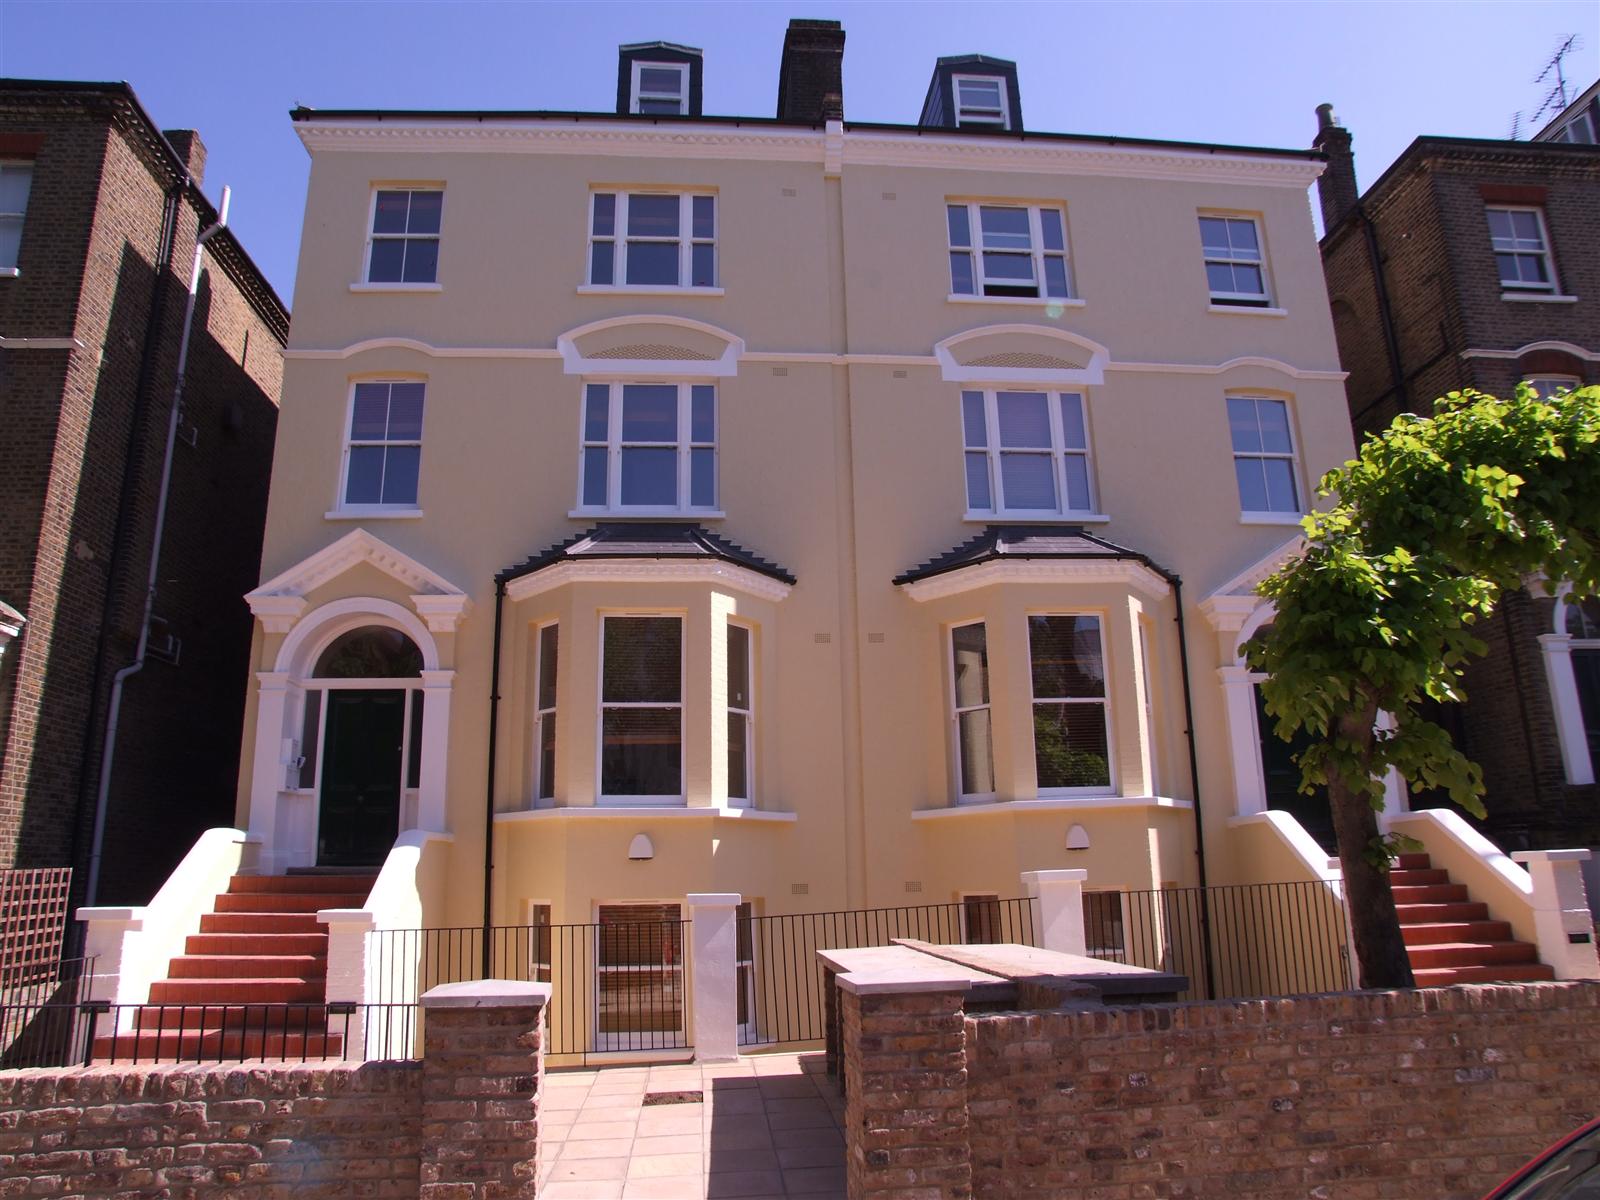 Forming part of a development of converted flats within a pair of  semi detached period houses is this spacious SPLIT LEVEL 1035 sq ft. UNFURNISHED apartment. The accommodation comprises of THREE DOUBLE BEDROOMS (one en-suite), massive open plan reception/kitchen leading to exclusive use of a ...